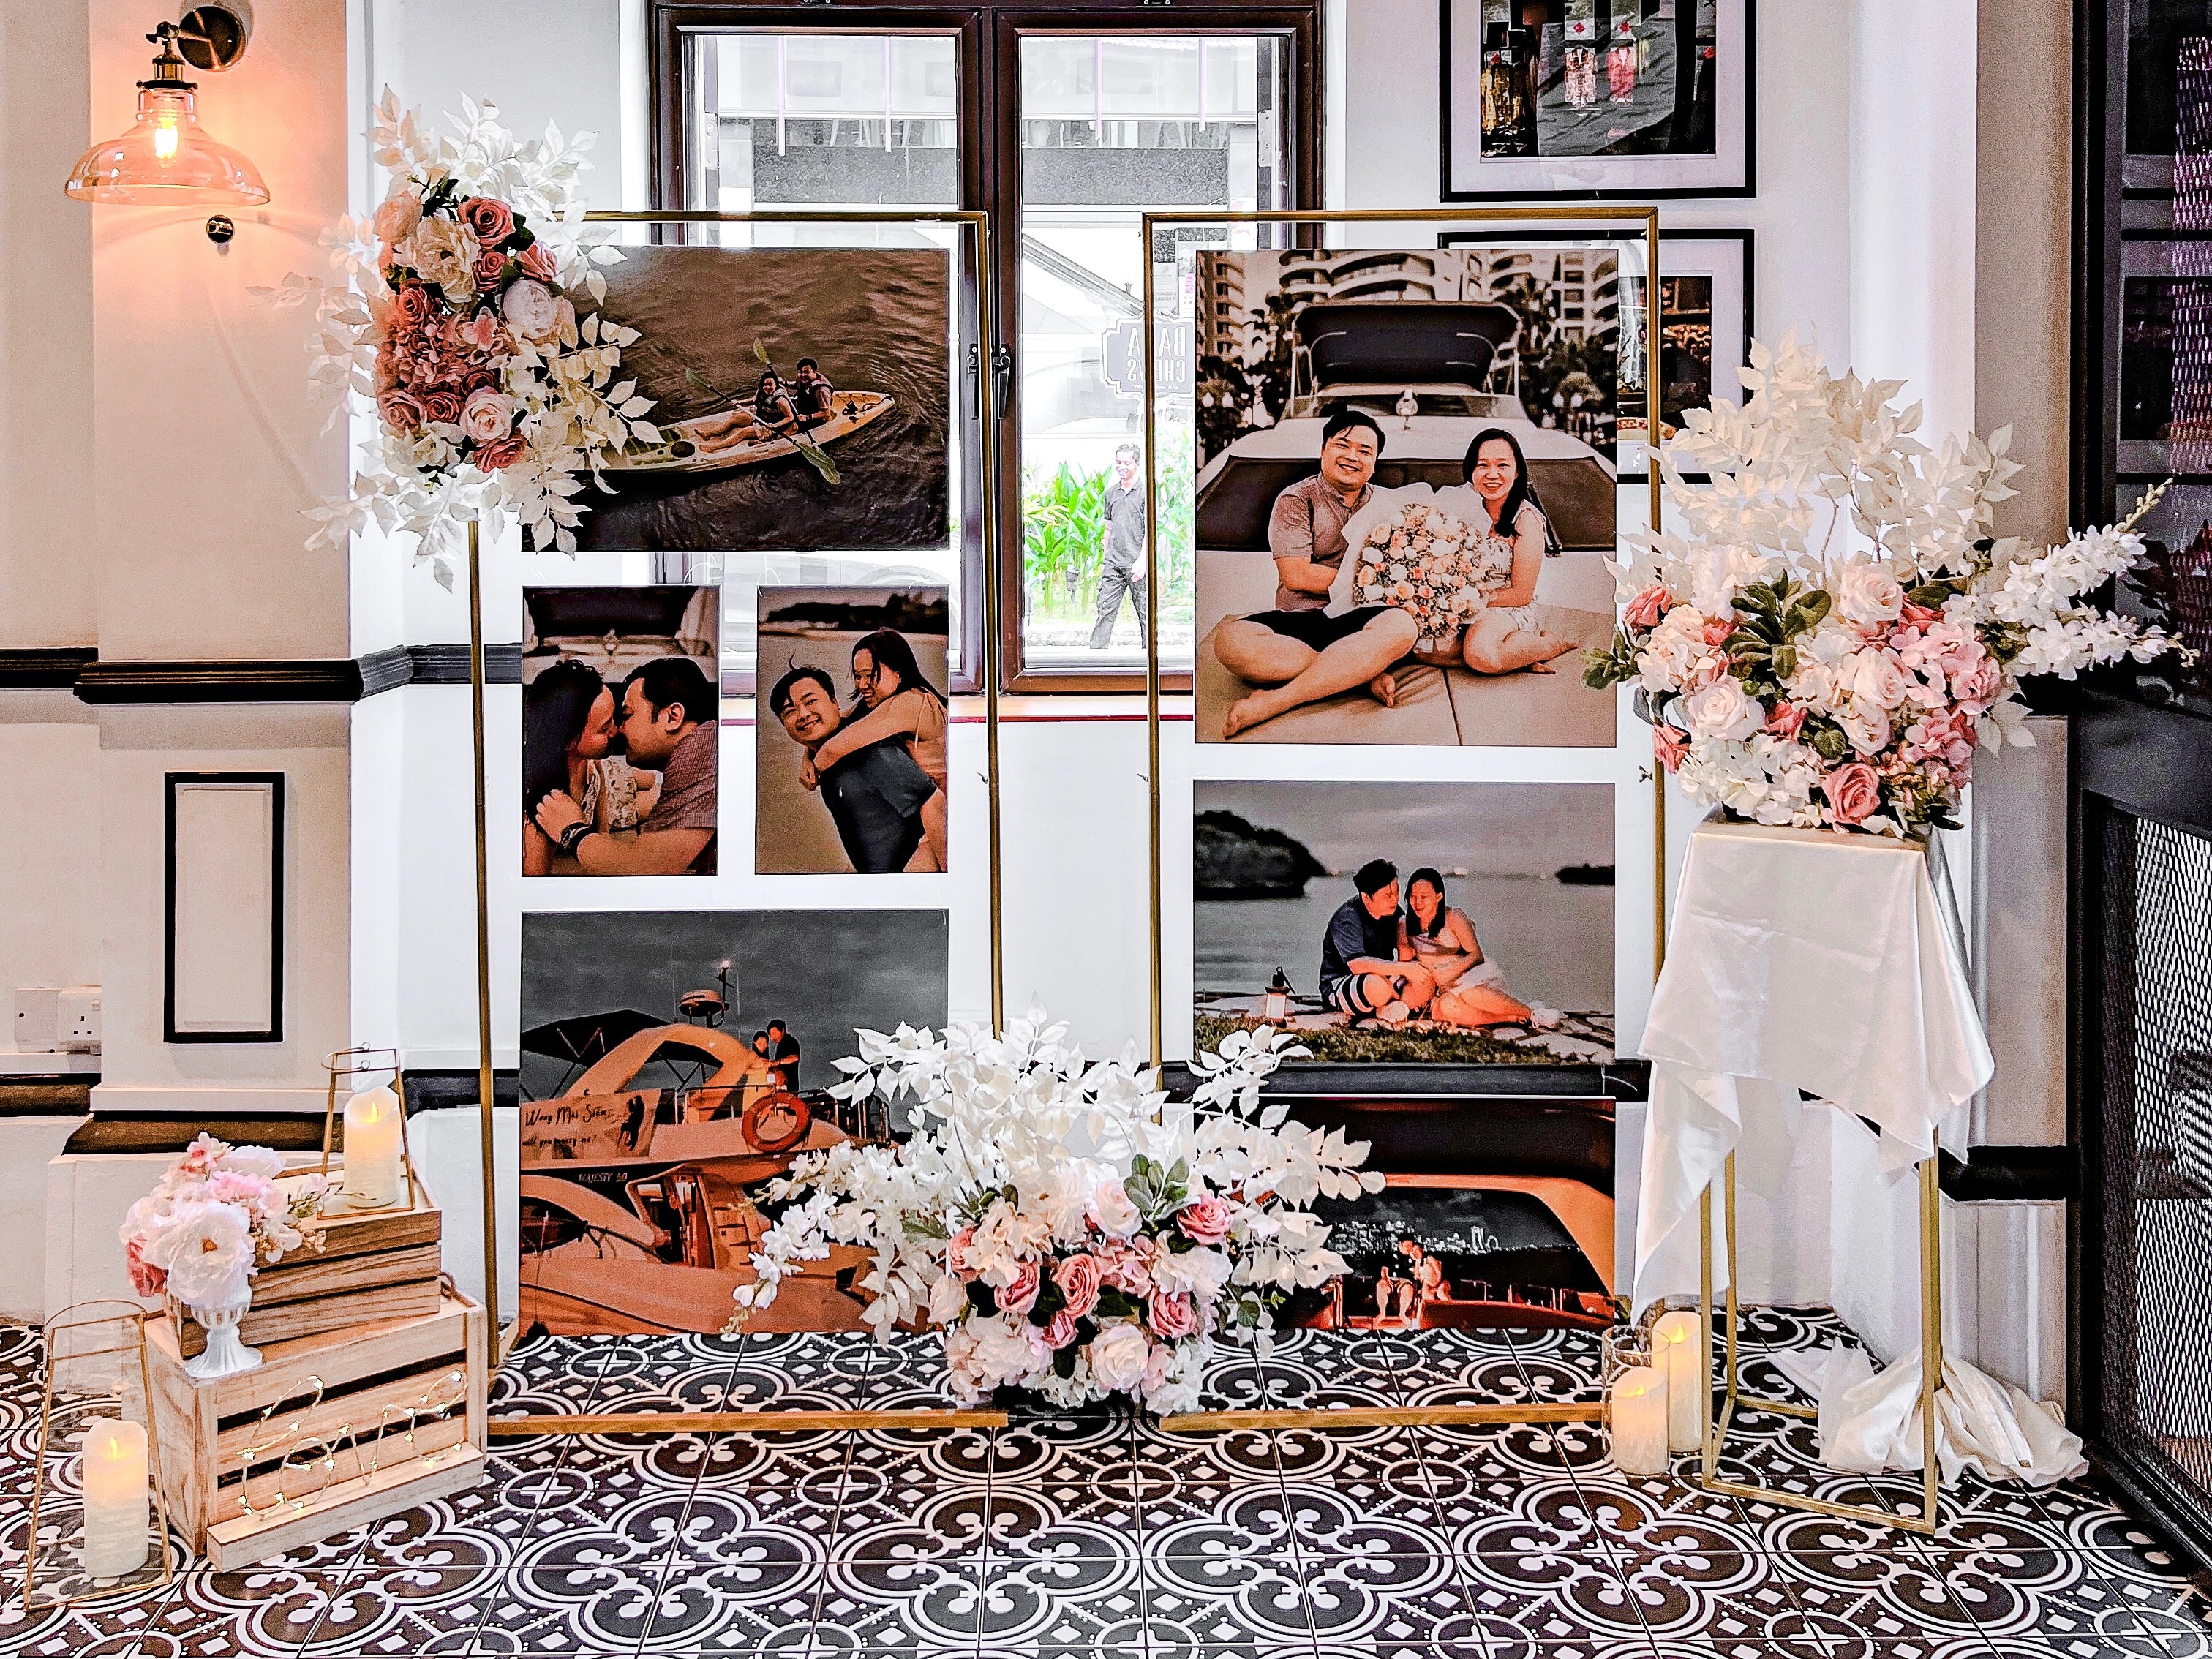 Wedding Reception Decor in Singapore - Multi-stands Photo Gallery with Pink White Peach Florals (Venue: Baba Chews)